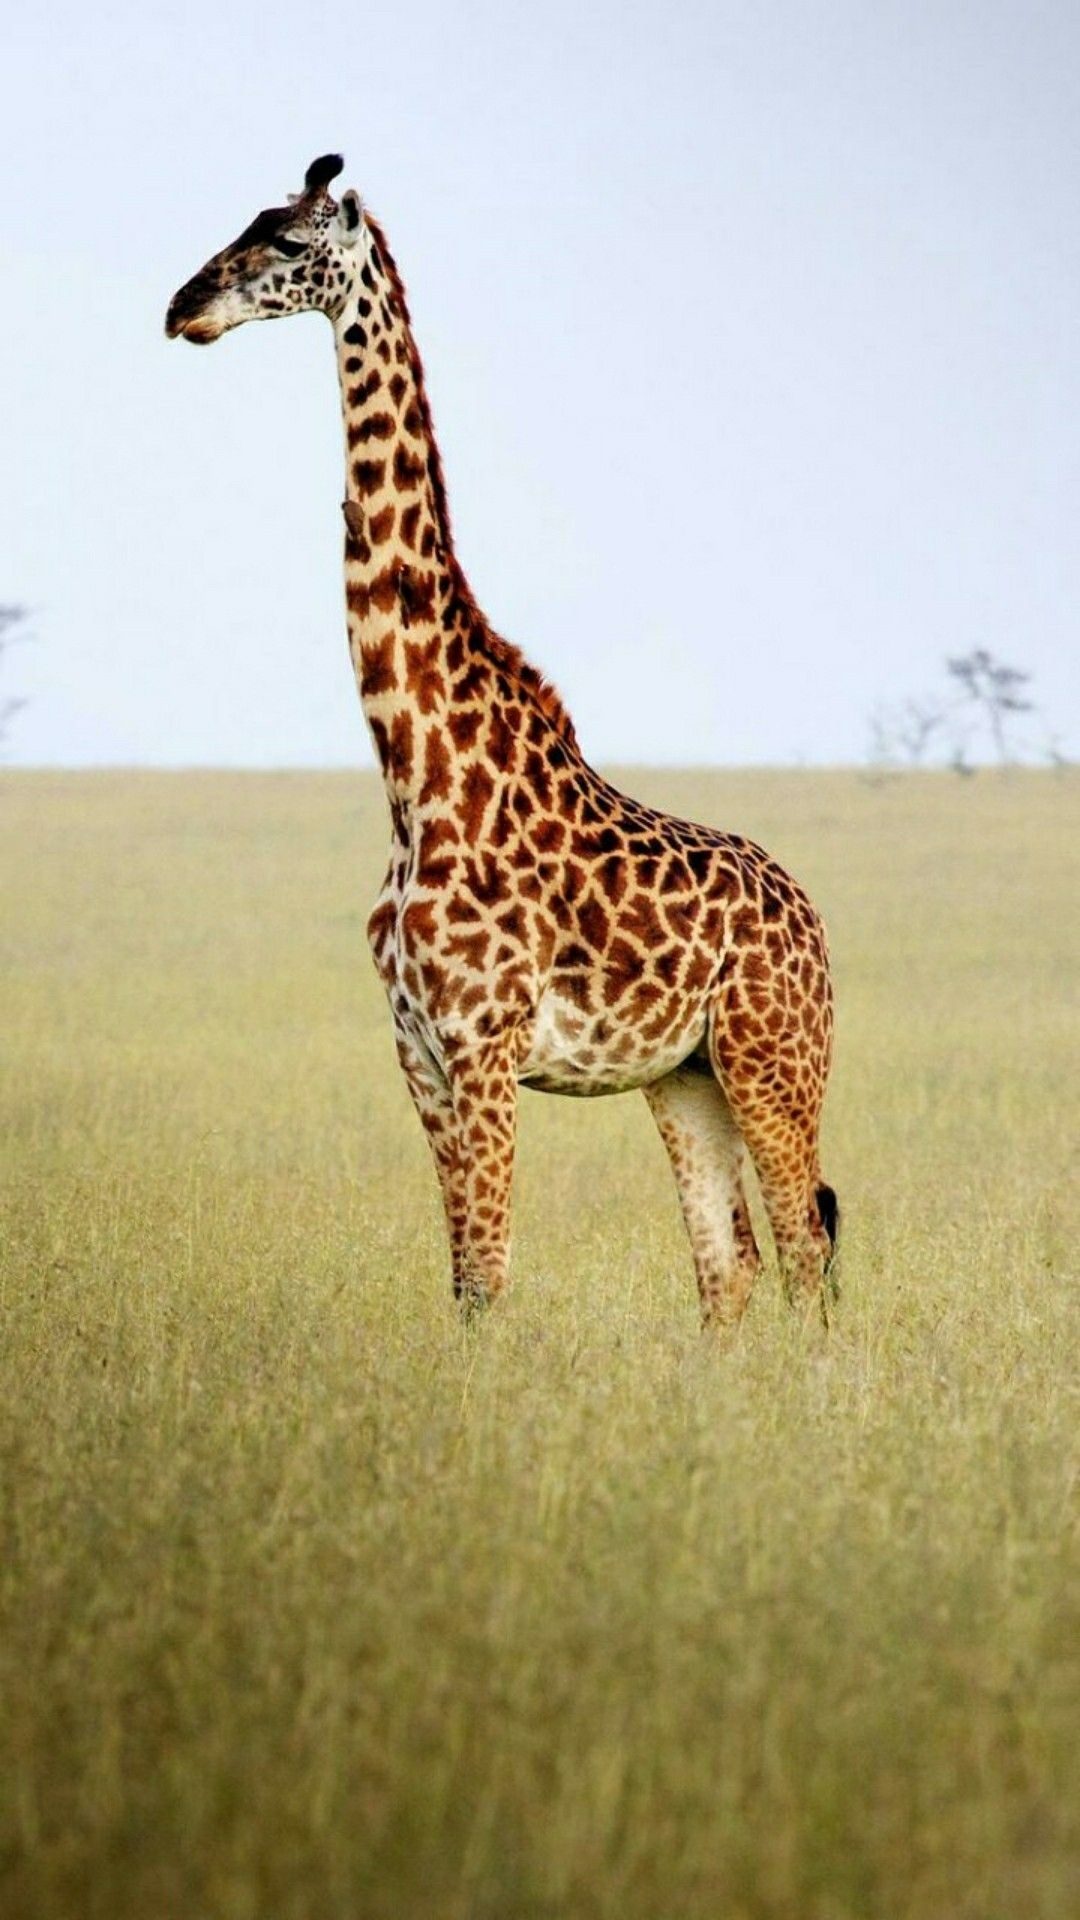 Giraffe: A tall, long-necked, spotted ruminant. 1080x1920 Full HD Background.